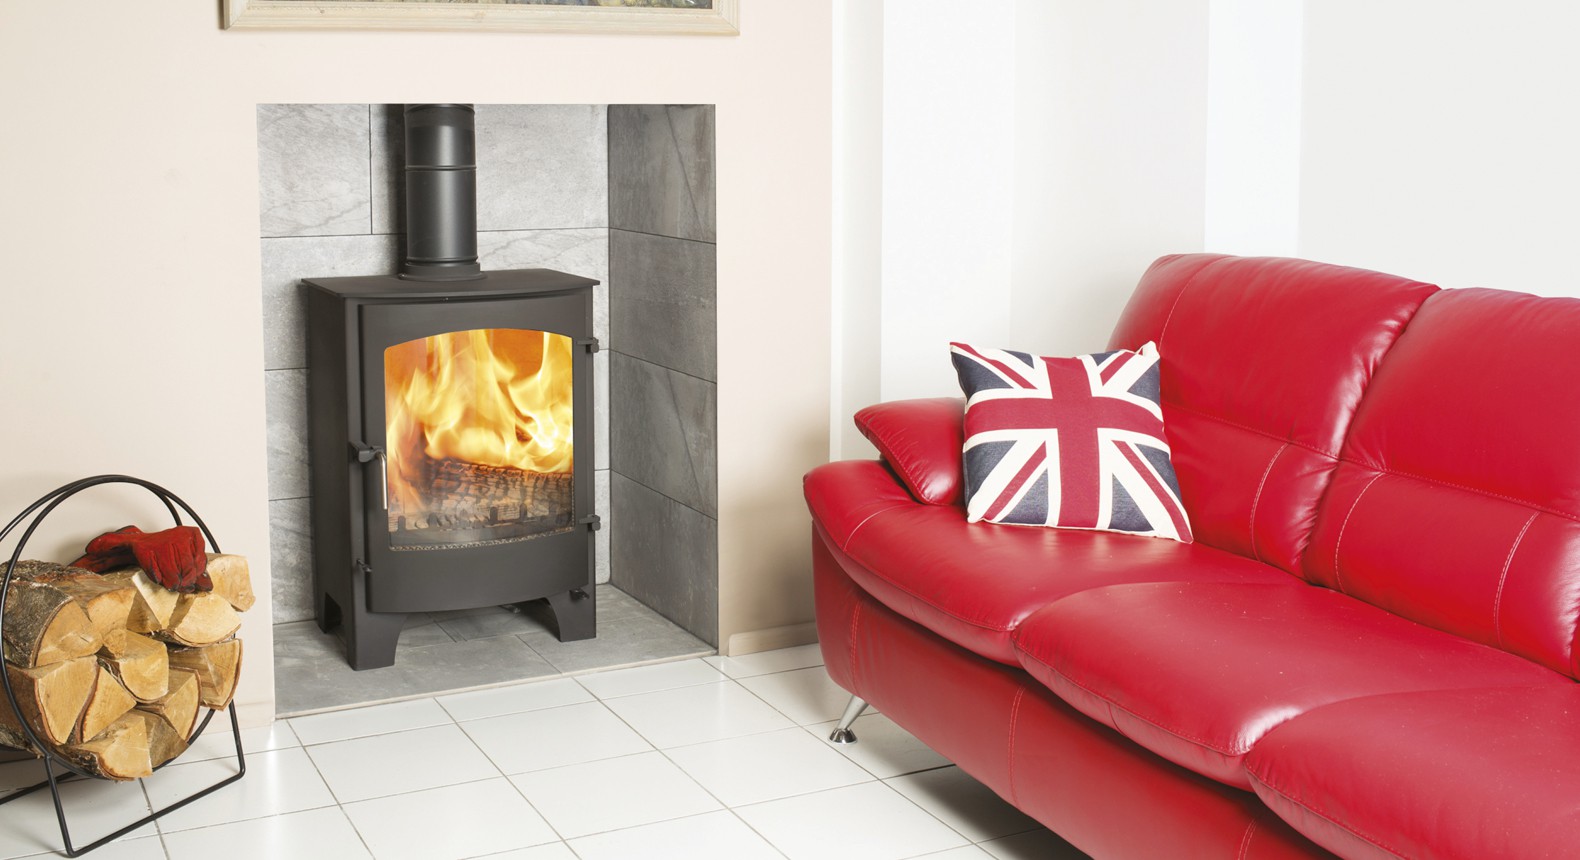 Charnwood Fireplaces. Wood burning, multi-fuel stoves & gas fires.